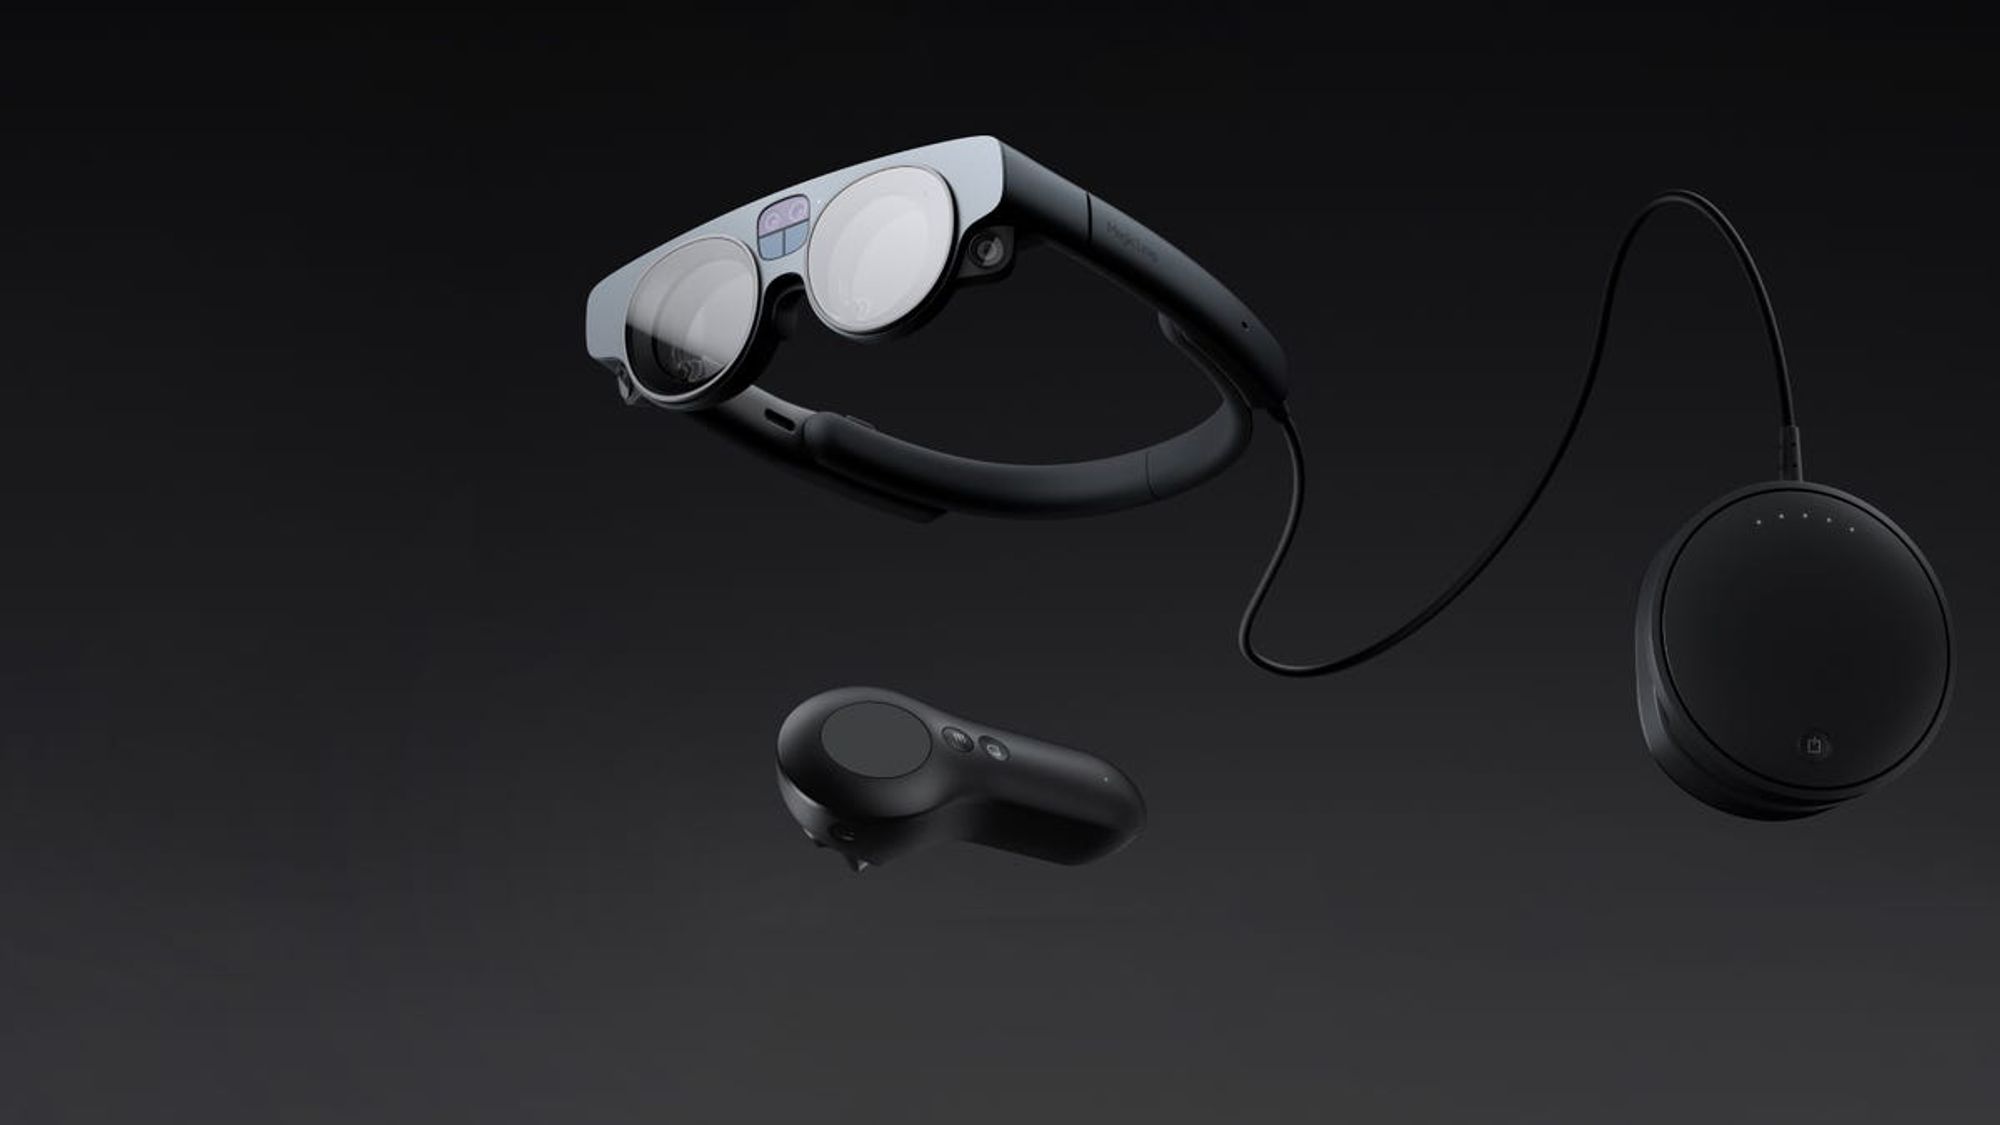 Magic Leap 2 Hands-On: AR Glasses That Can Dim The Real World